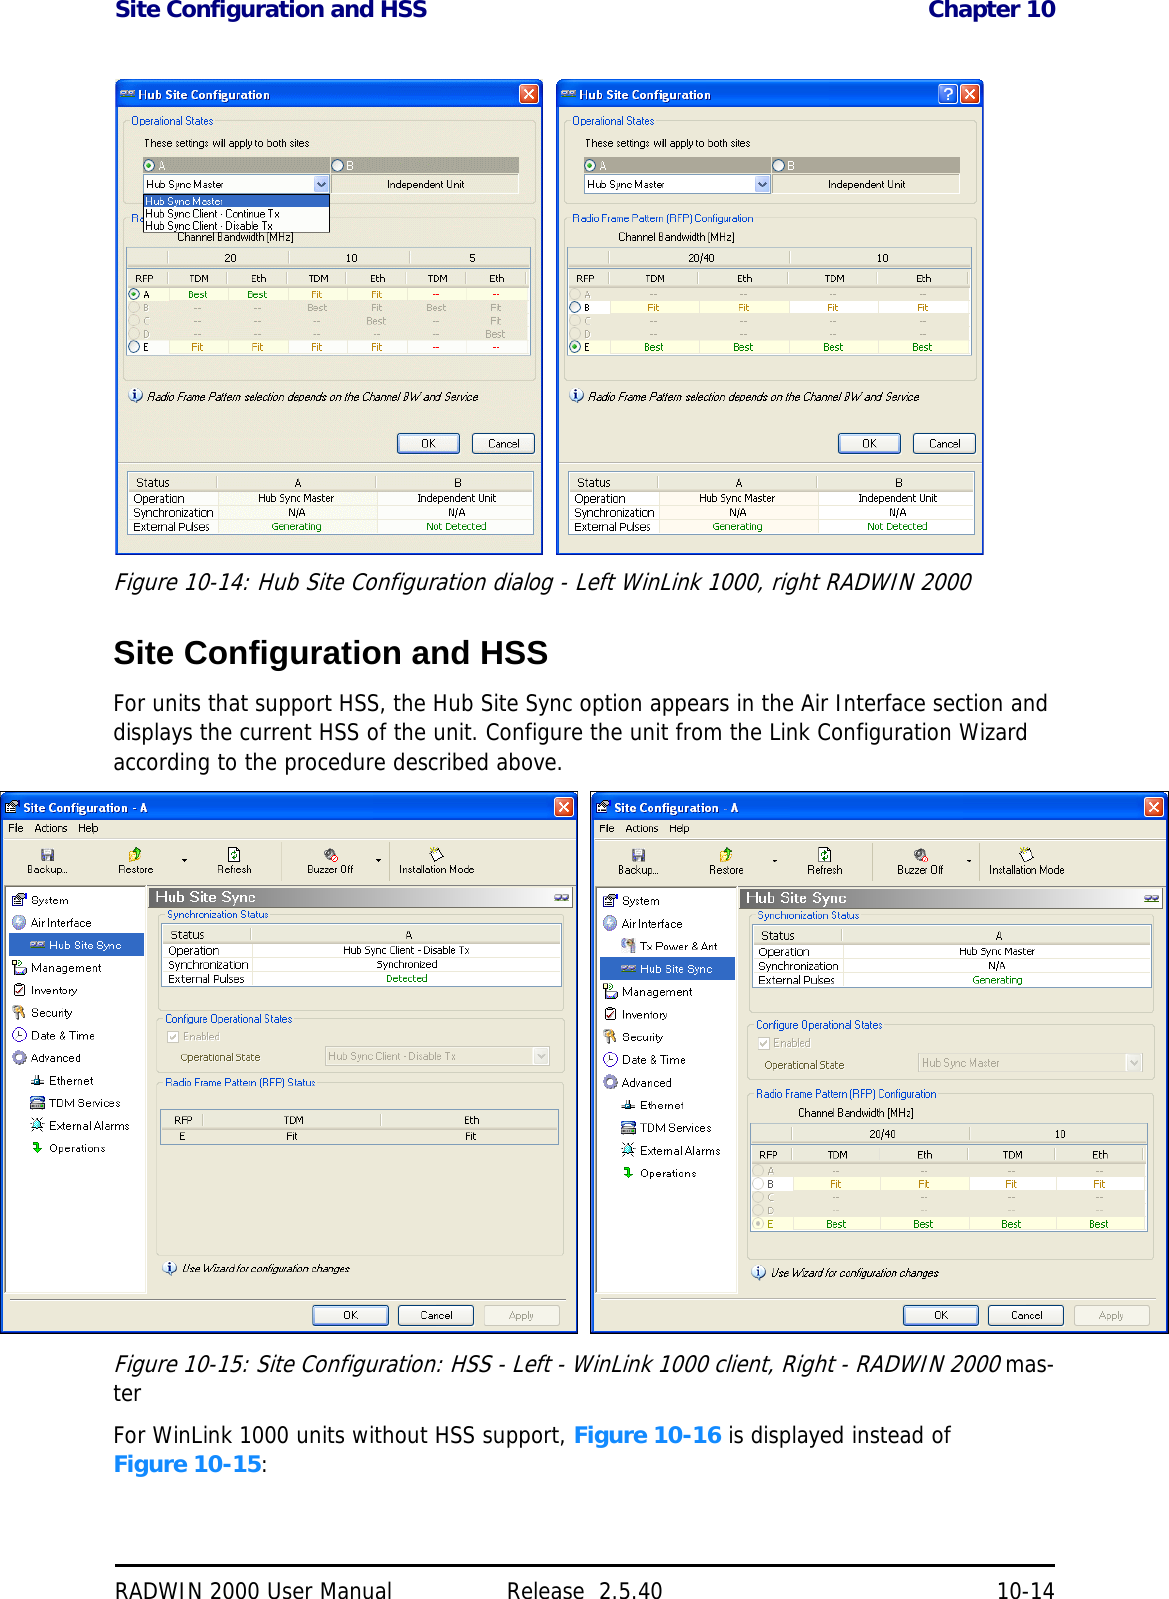 Site Configuration and HSS Chapter 10RADWIN 2000 User Manual Release  2.5.40 10-14        Figure 10-14: Hub Site Configuration dialog - Left WinLink 1000, right RADWIN 2000Site Configuration and HSSFor units that support HSS, the Hub Site Sync option appears in the Air Interface section and displays the current HSS of the unit. Configure the unit from the Link Configuration Wizard according to the procedure described above.Figure 10-15: Site Configuration: HSS - Left - WinLink 1000 client, Right - RADWIN 2000 mas-terFor WinLink 1000 units without HSS support, Figure 10-16 is displayed instead of Figure 10-15: